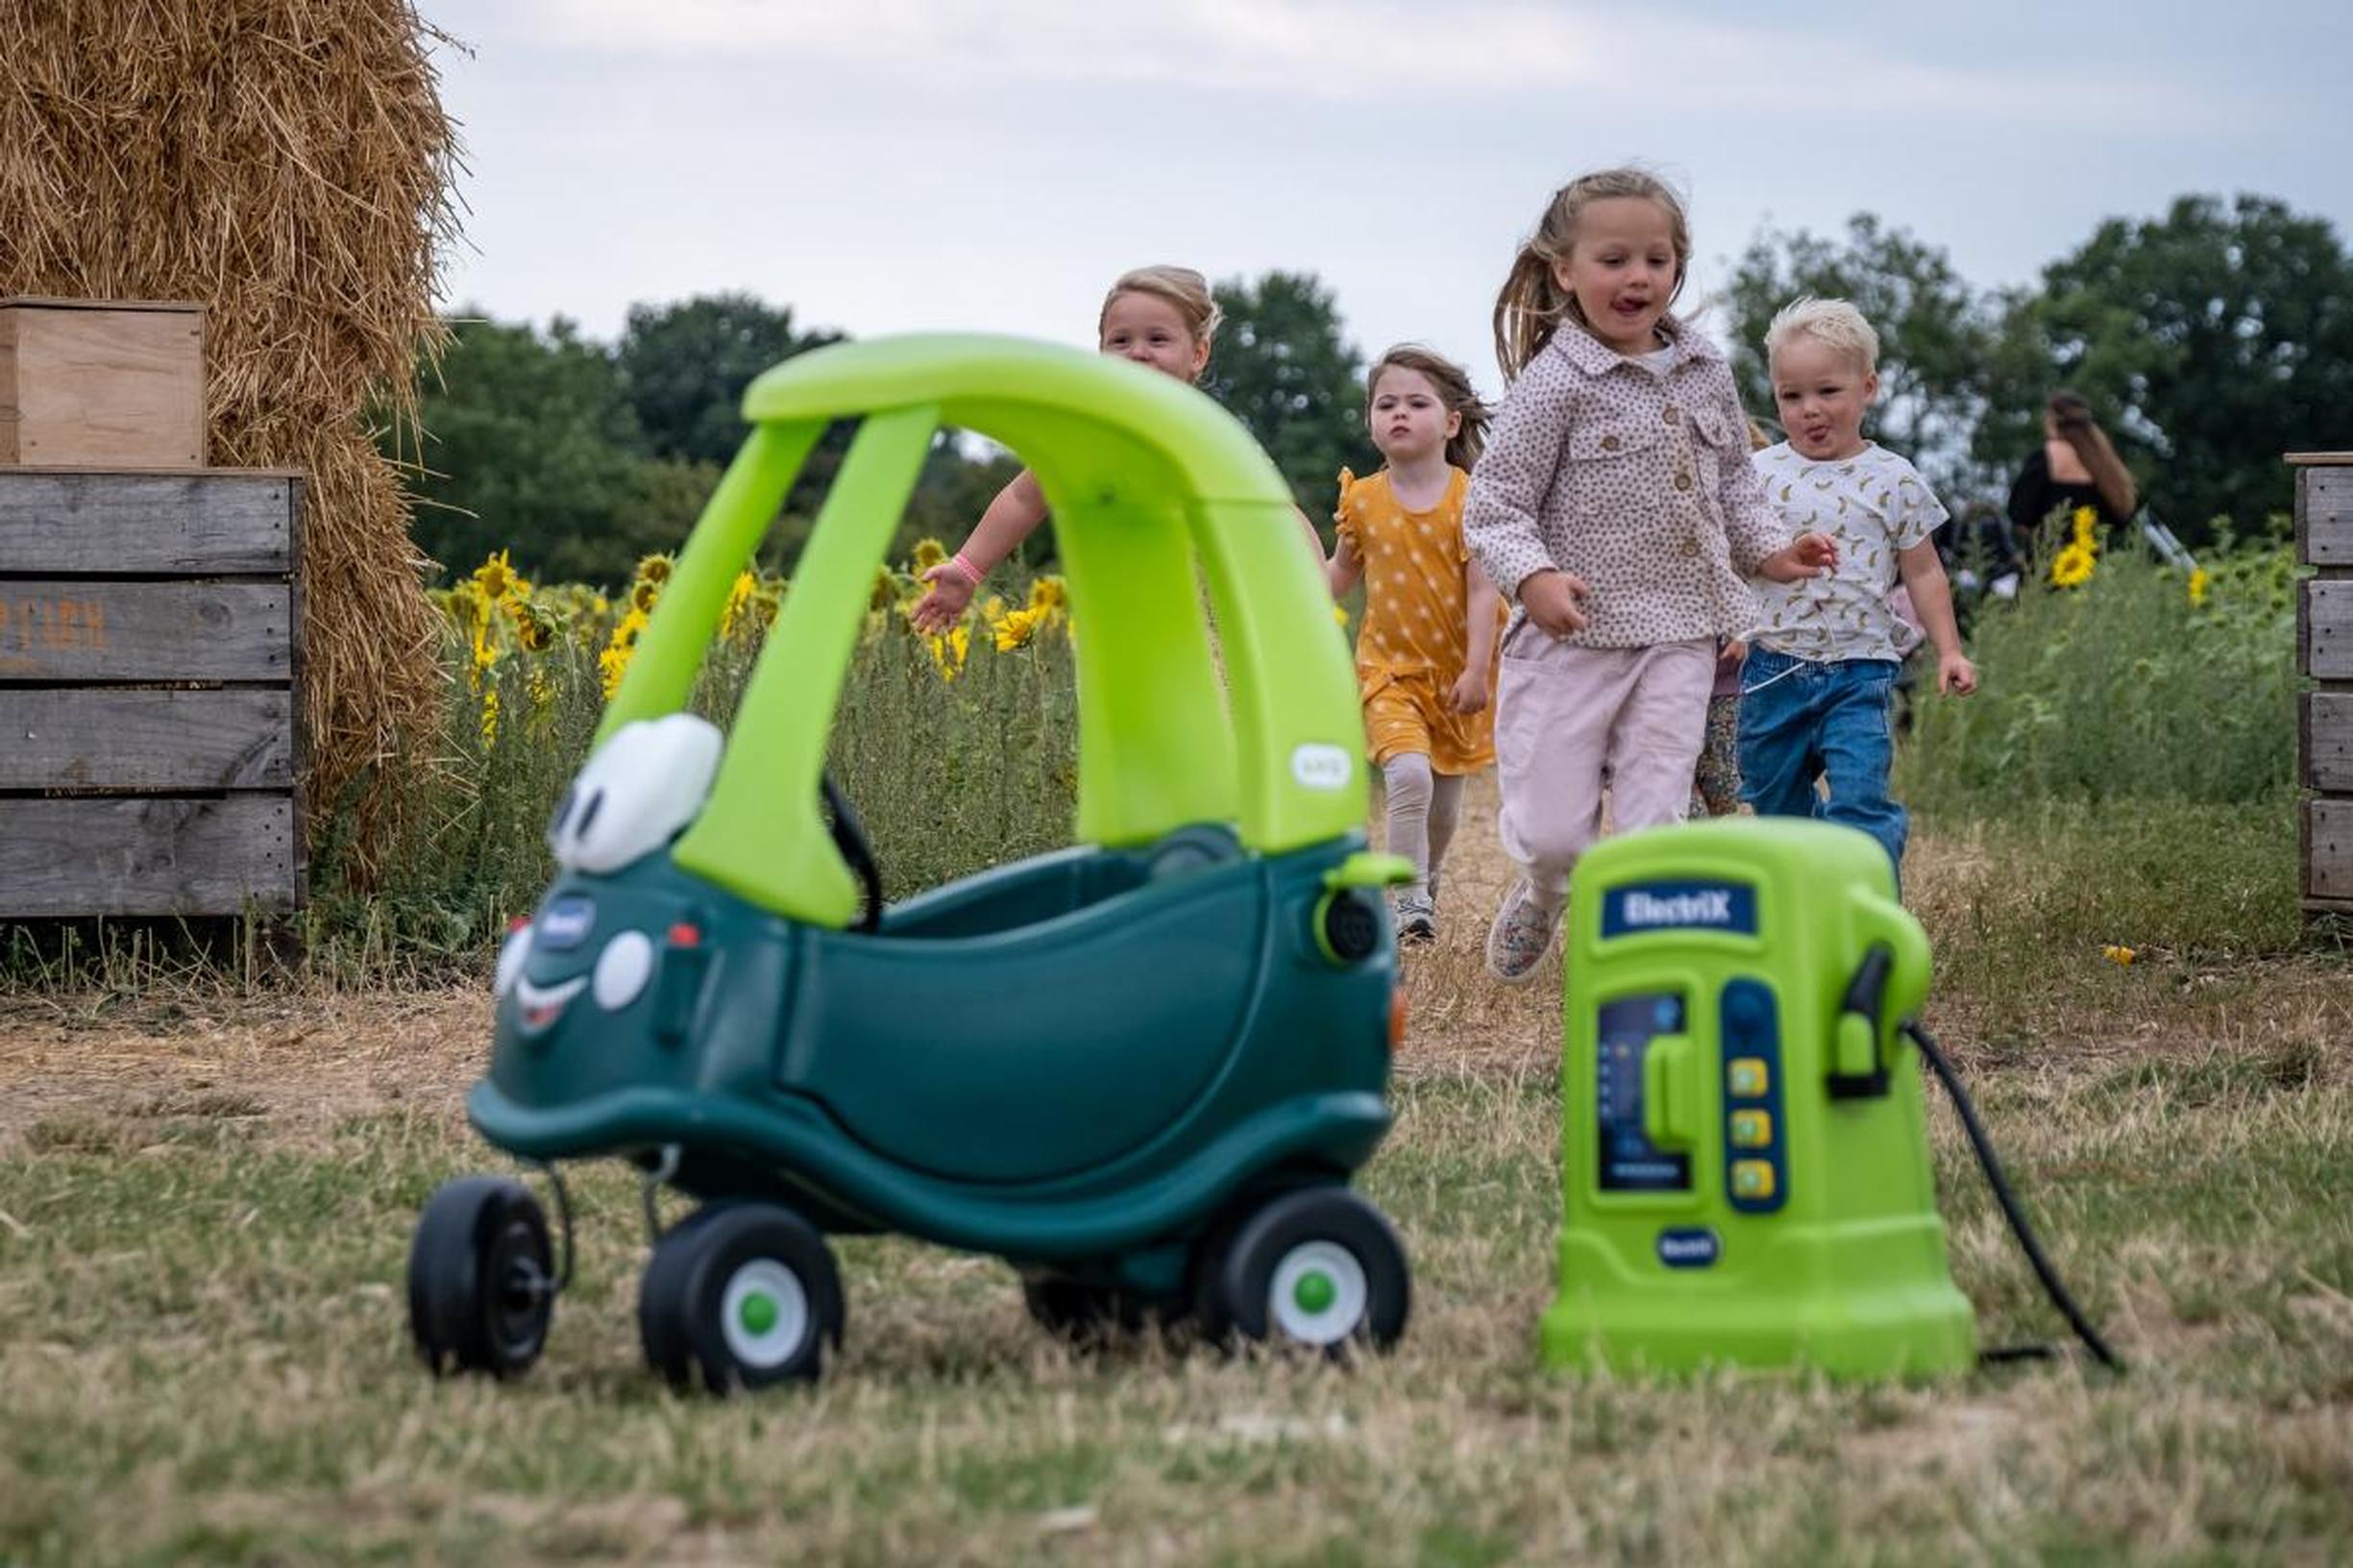 V= General Insurance and ElectriX joined forces with toy car manufacturer Little Tikes to give the iconic Cozy Coupe toy car a one-off electric makeover